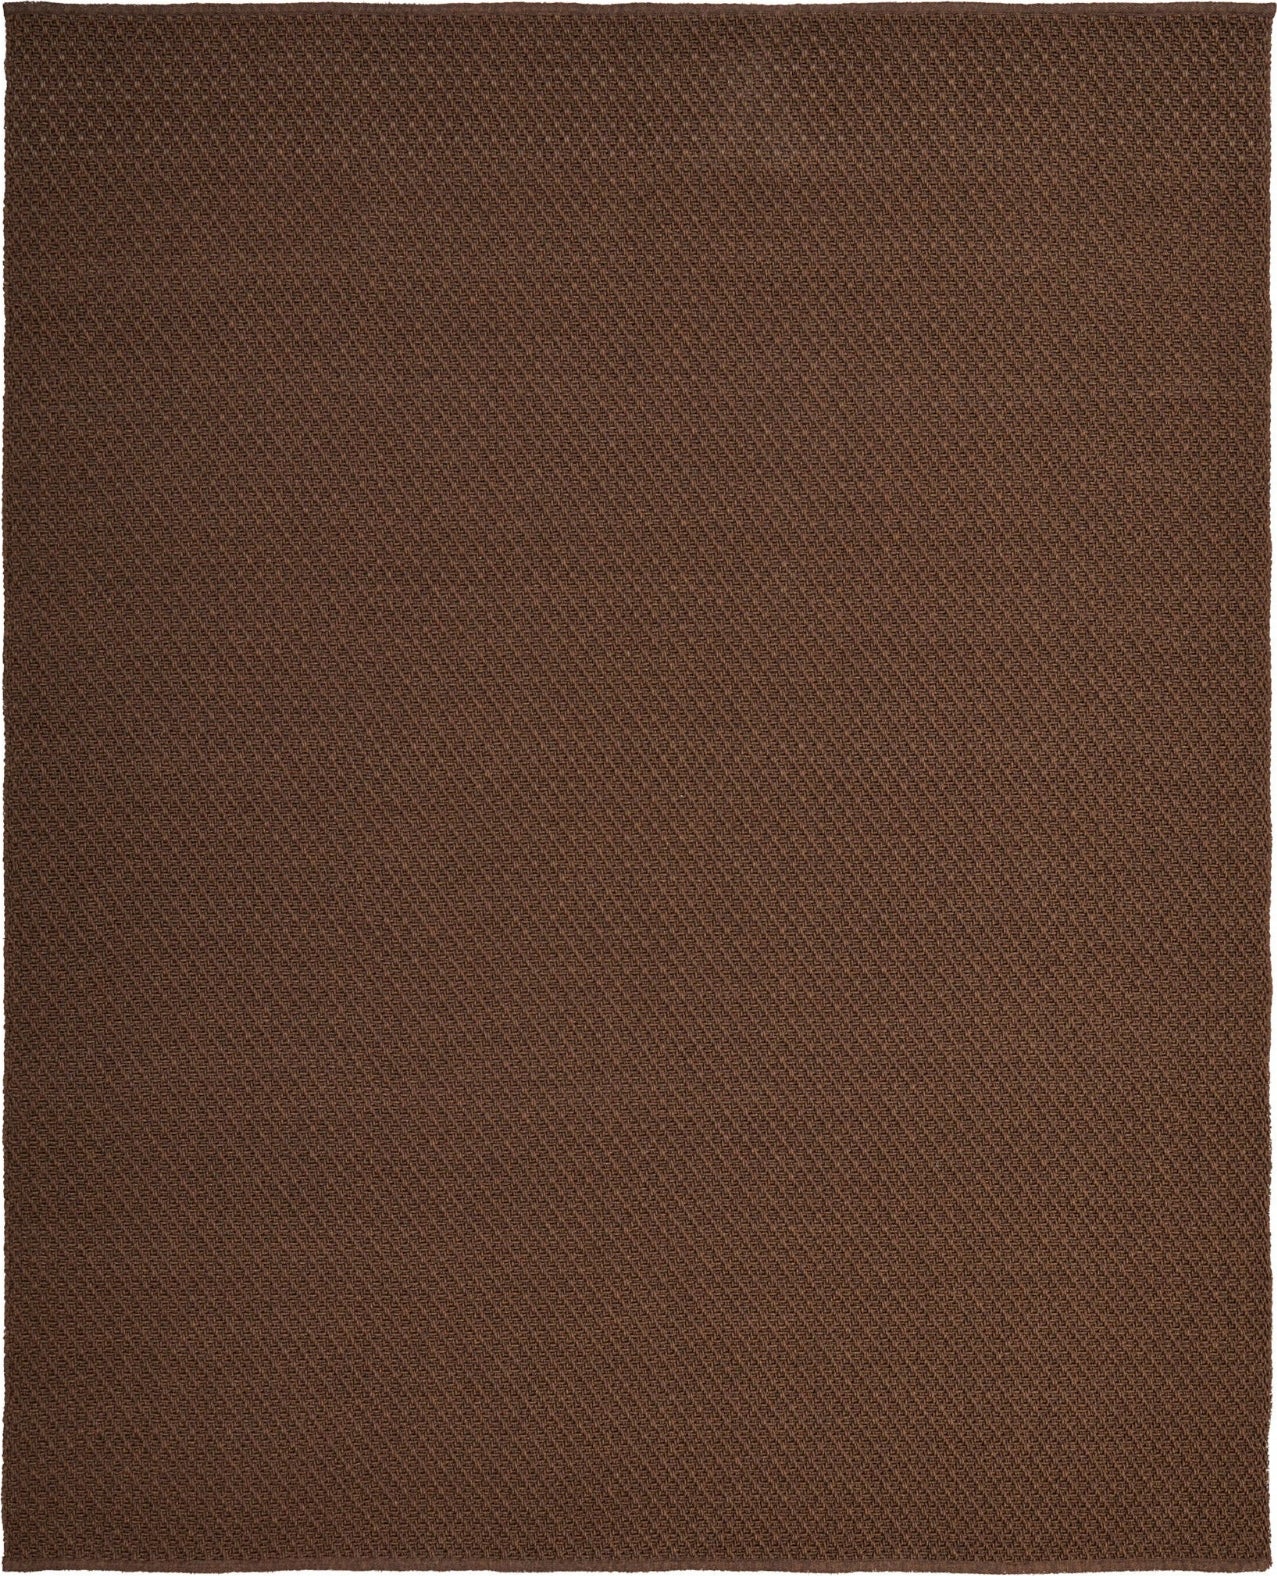 Feizy Tito 0826F Brown Area Rug